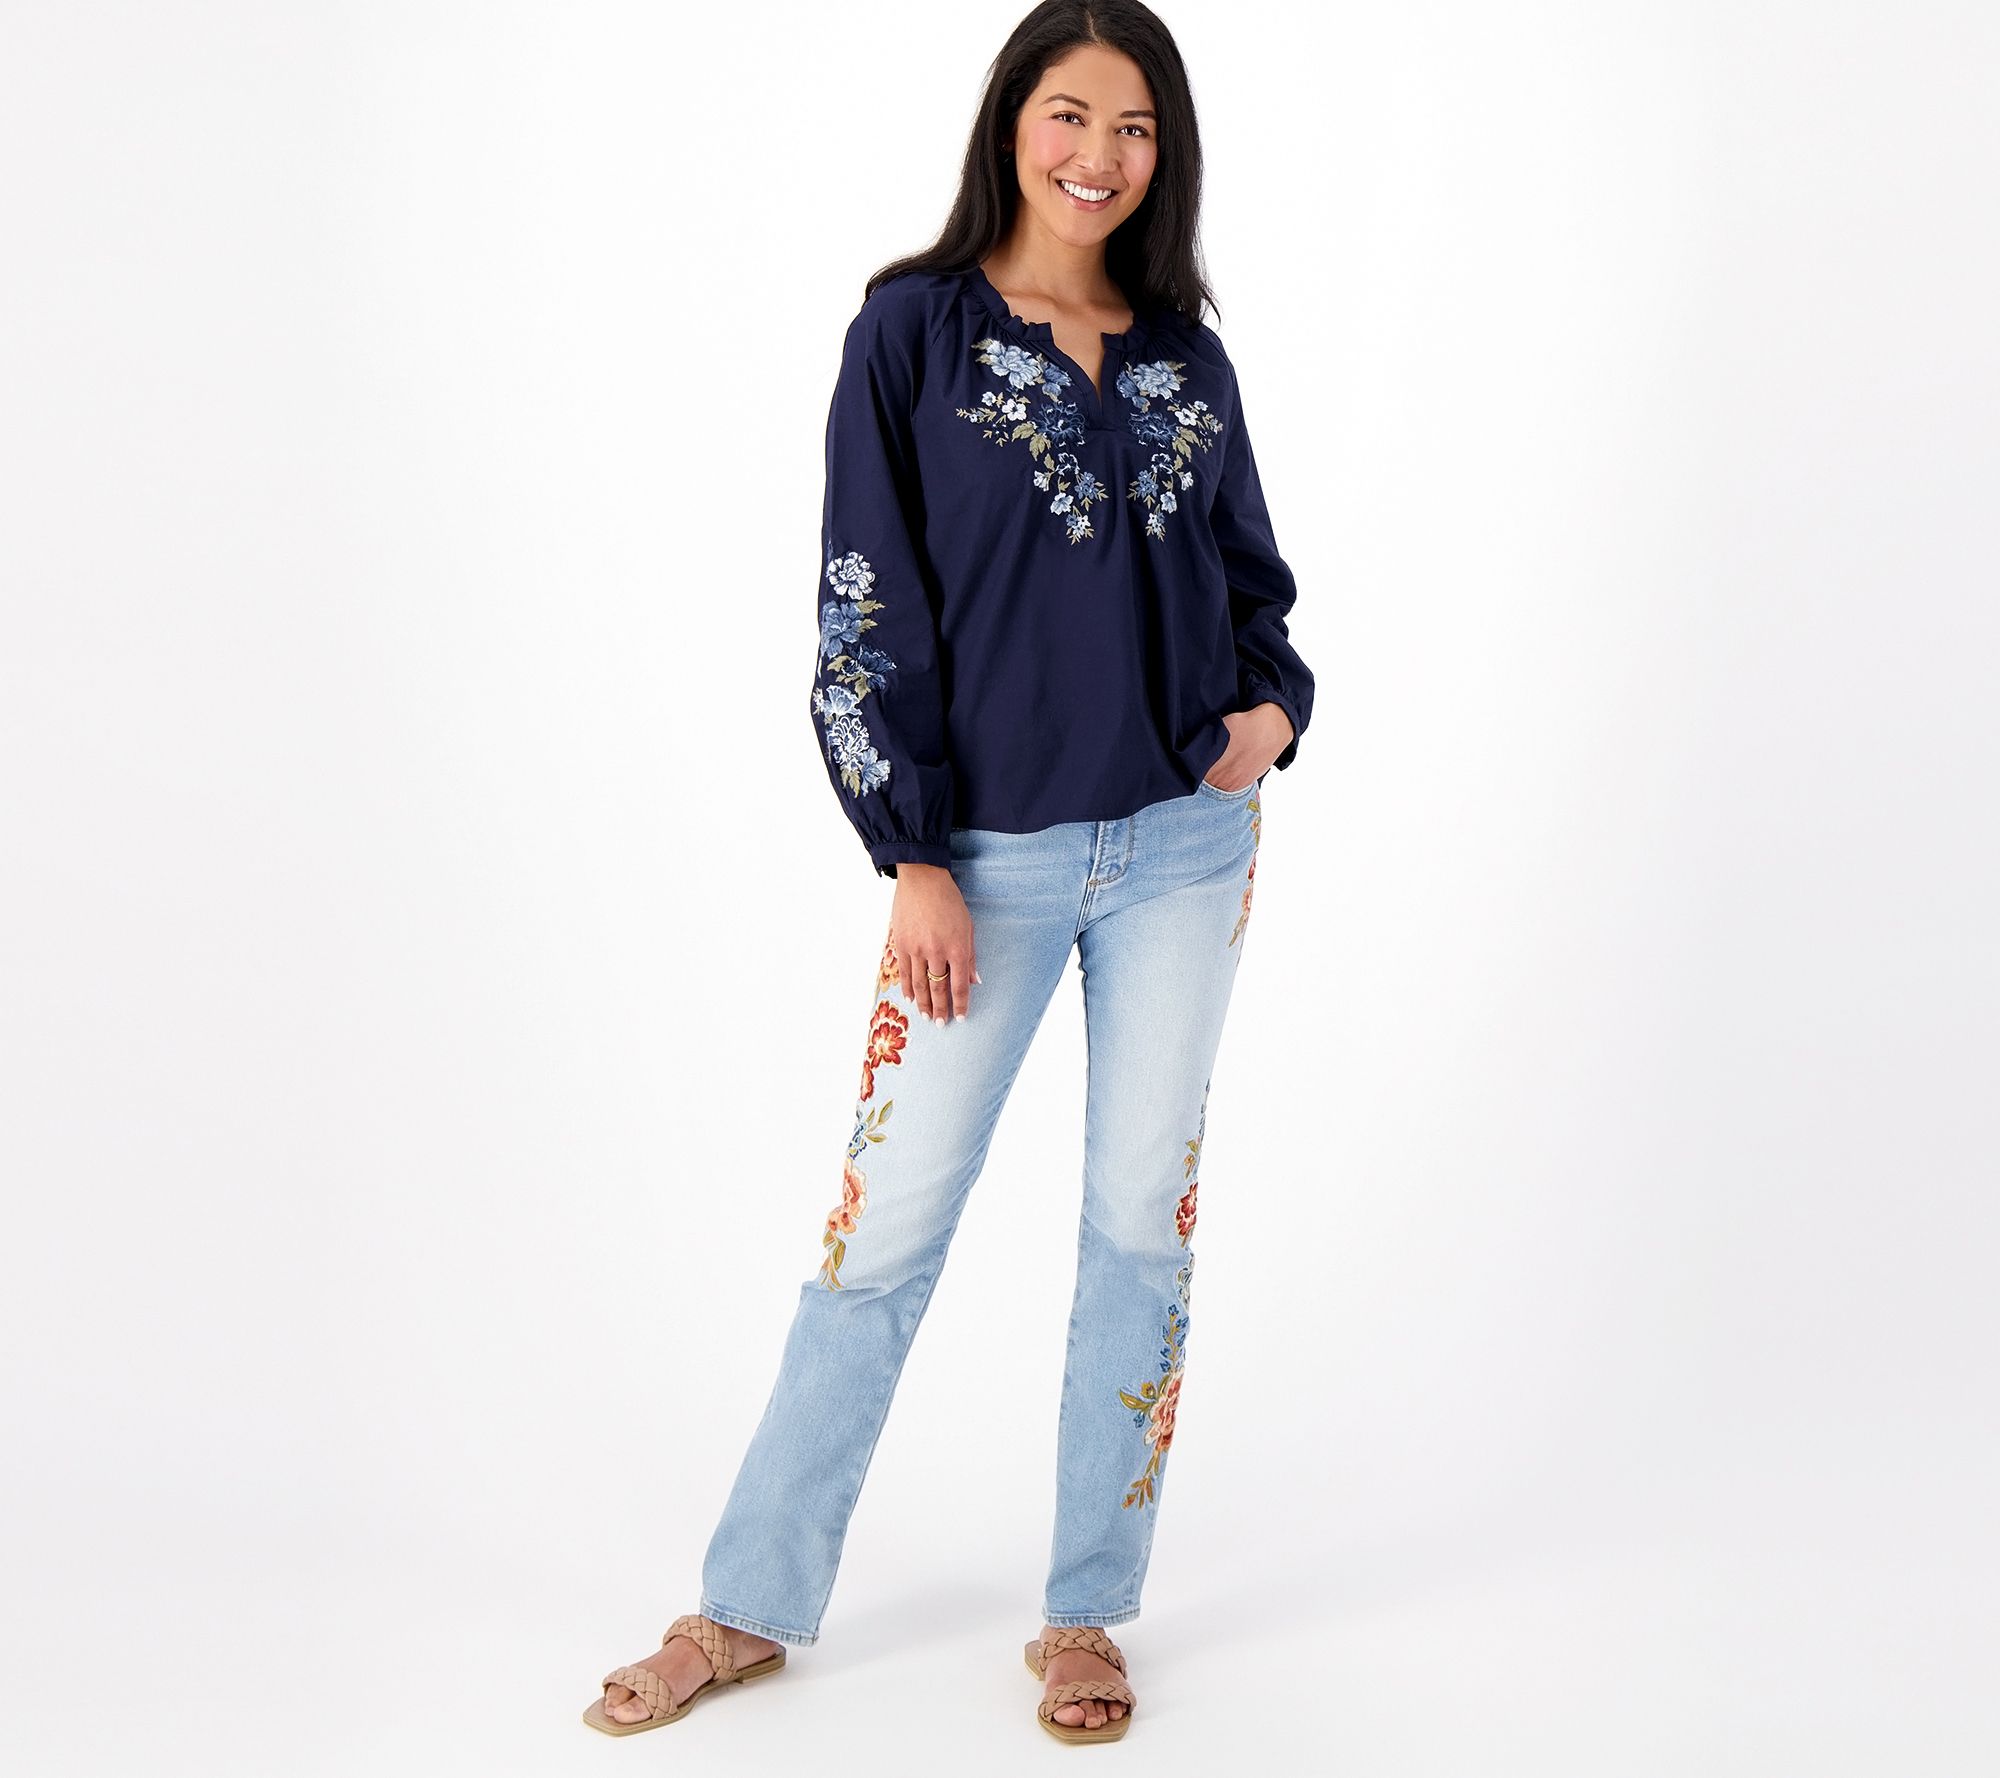 Driftwood Jeans Embroidered Peasant Top- Bluebell Fleur - QVC.com